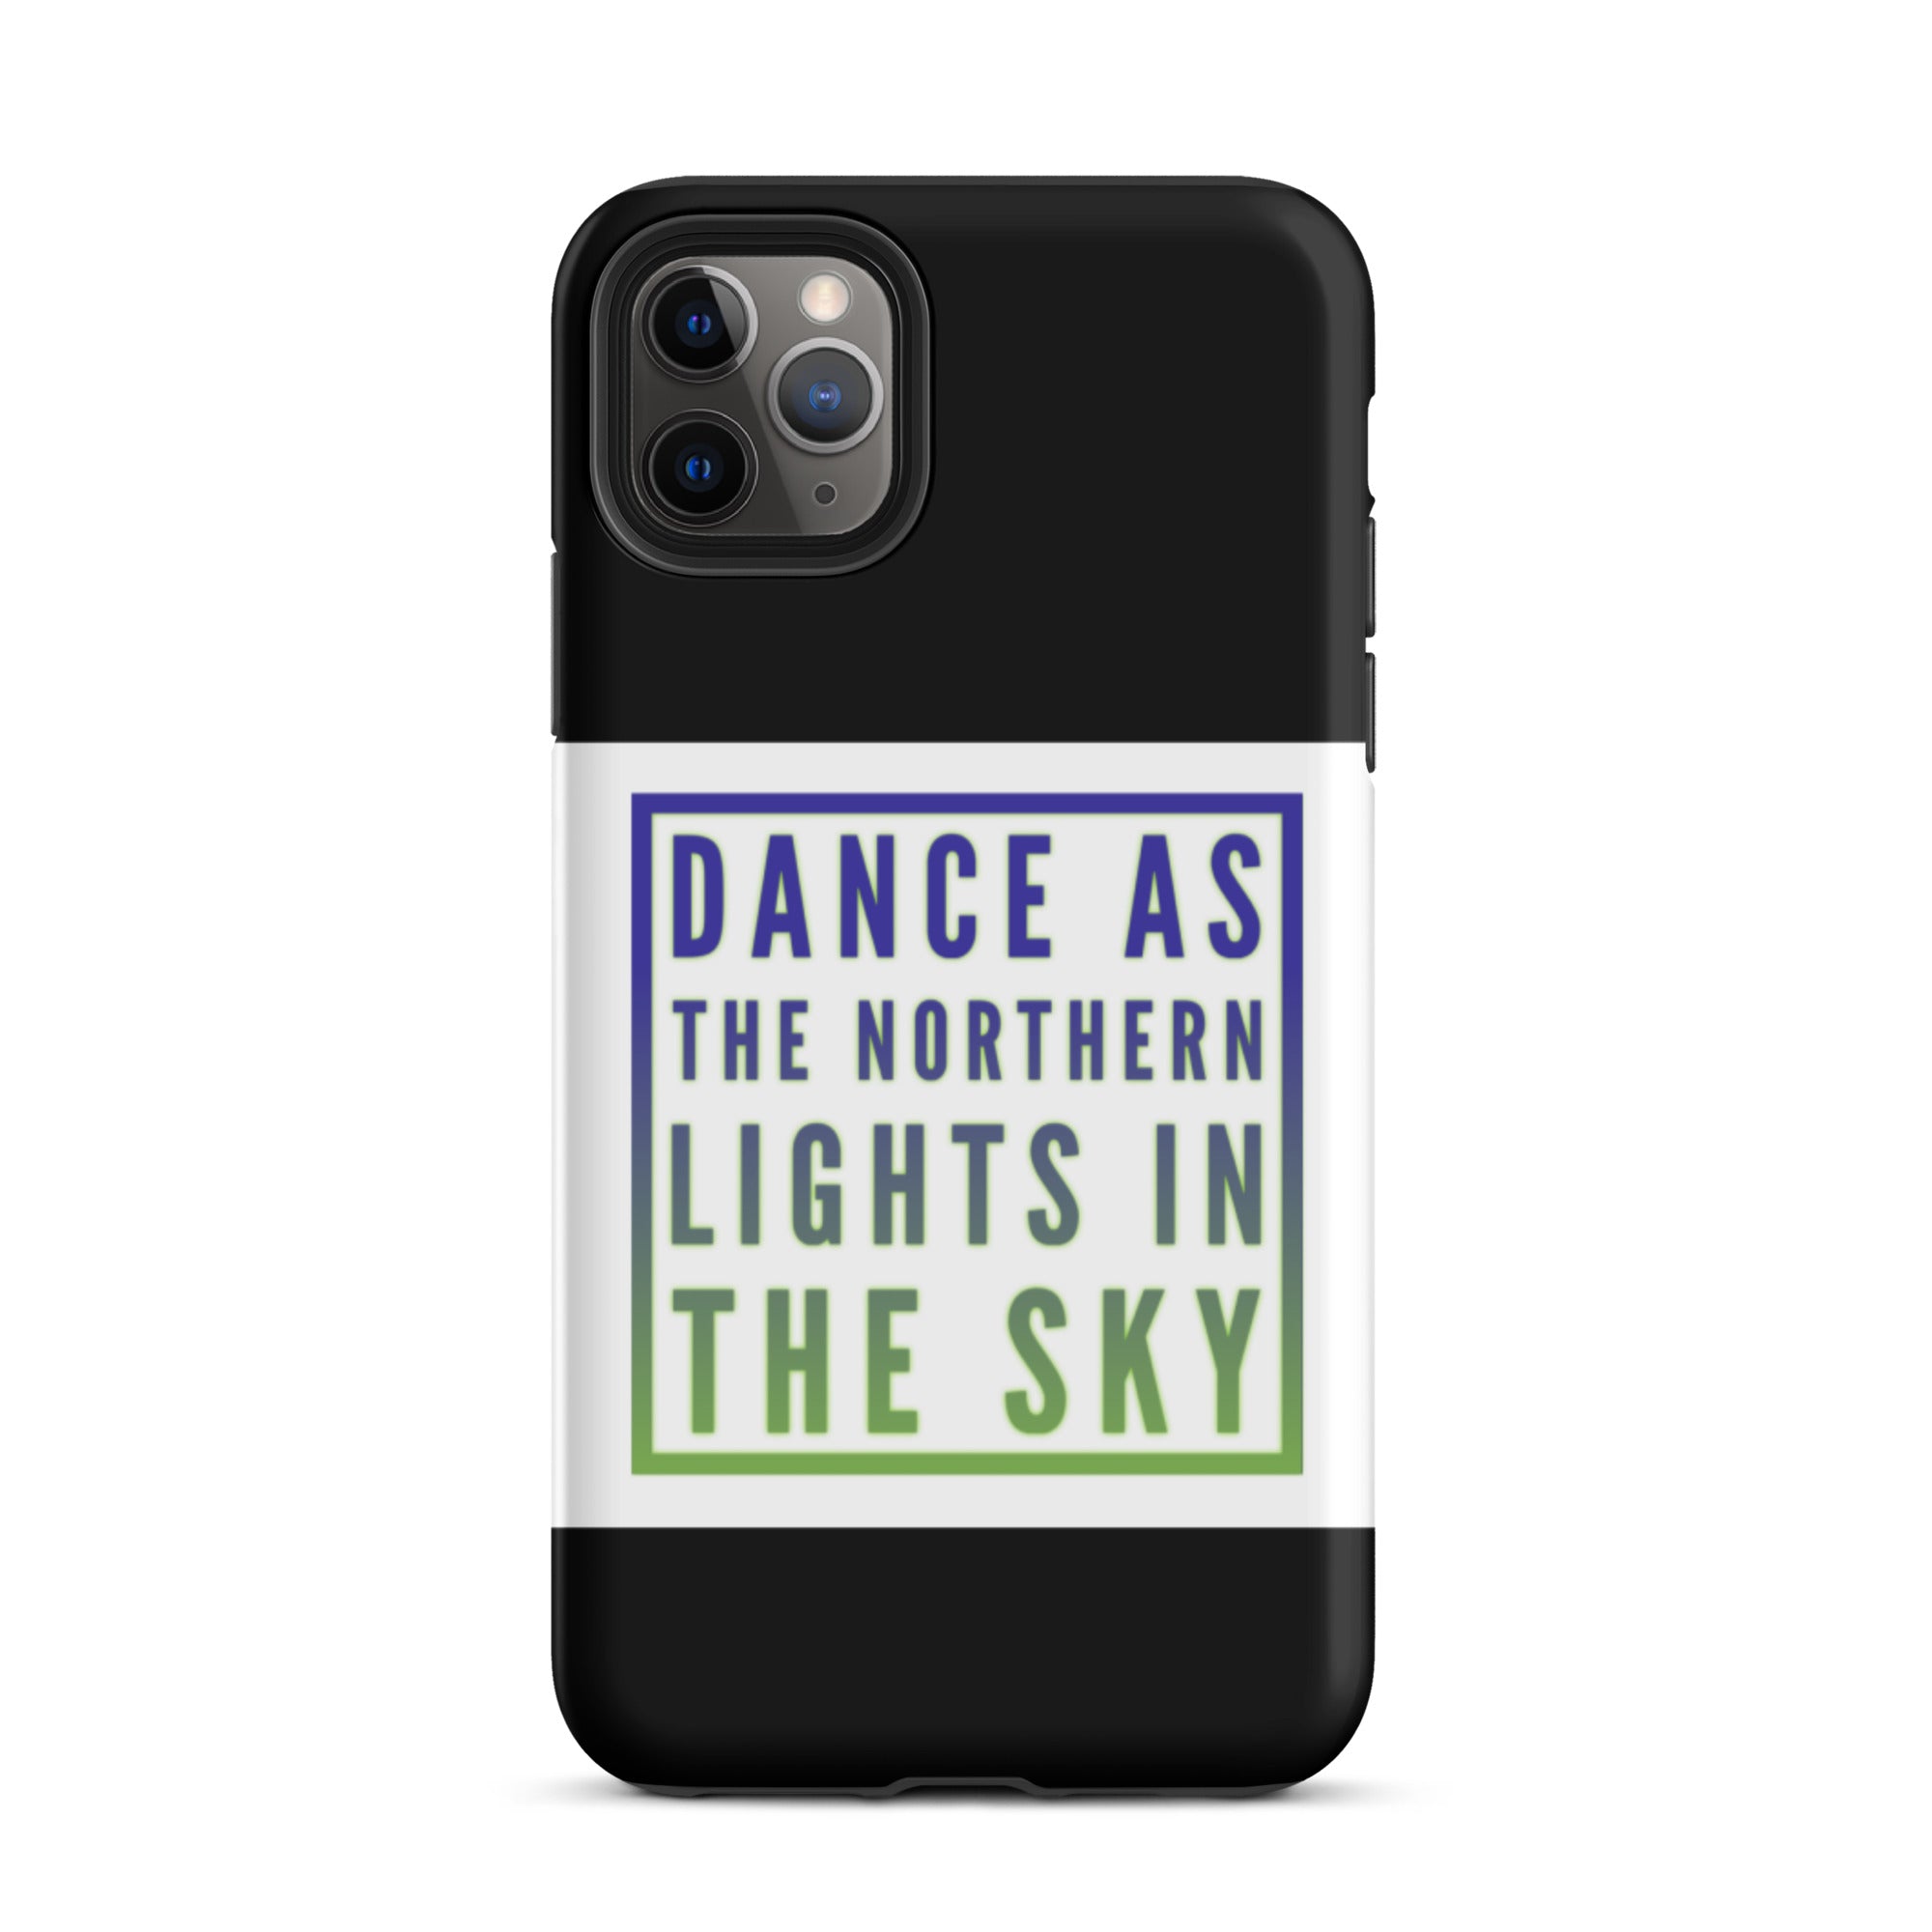 GloWell Designs - Tough iPhone Case - Motivational Quote - Dance As The Northern Lights